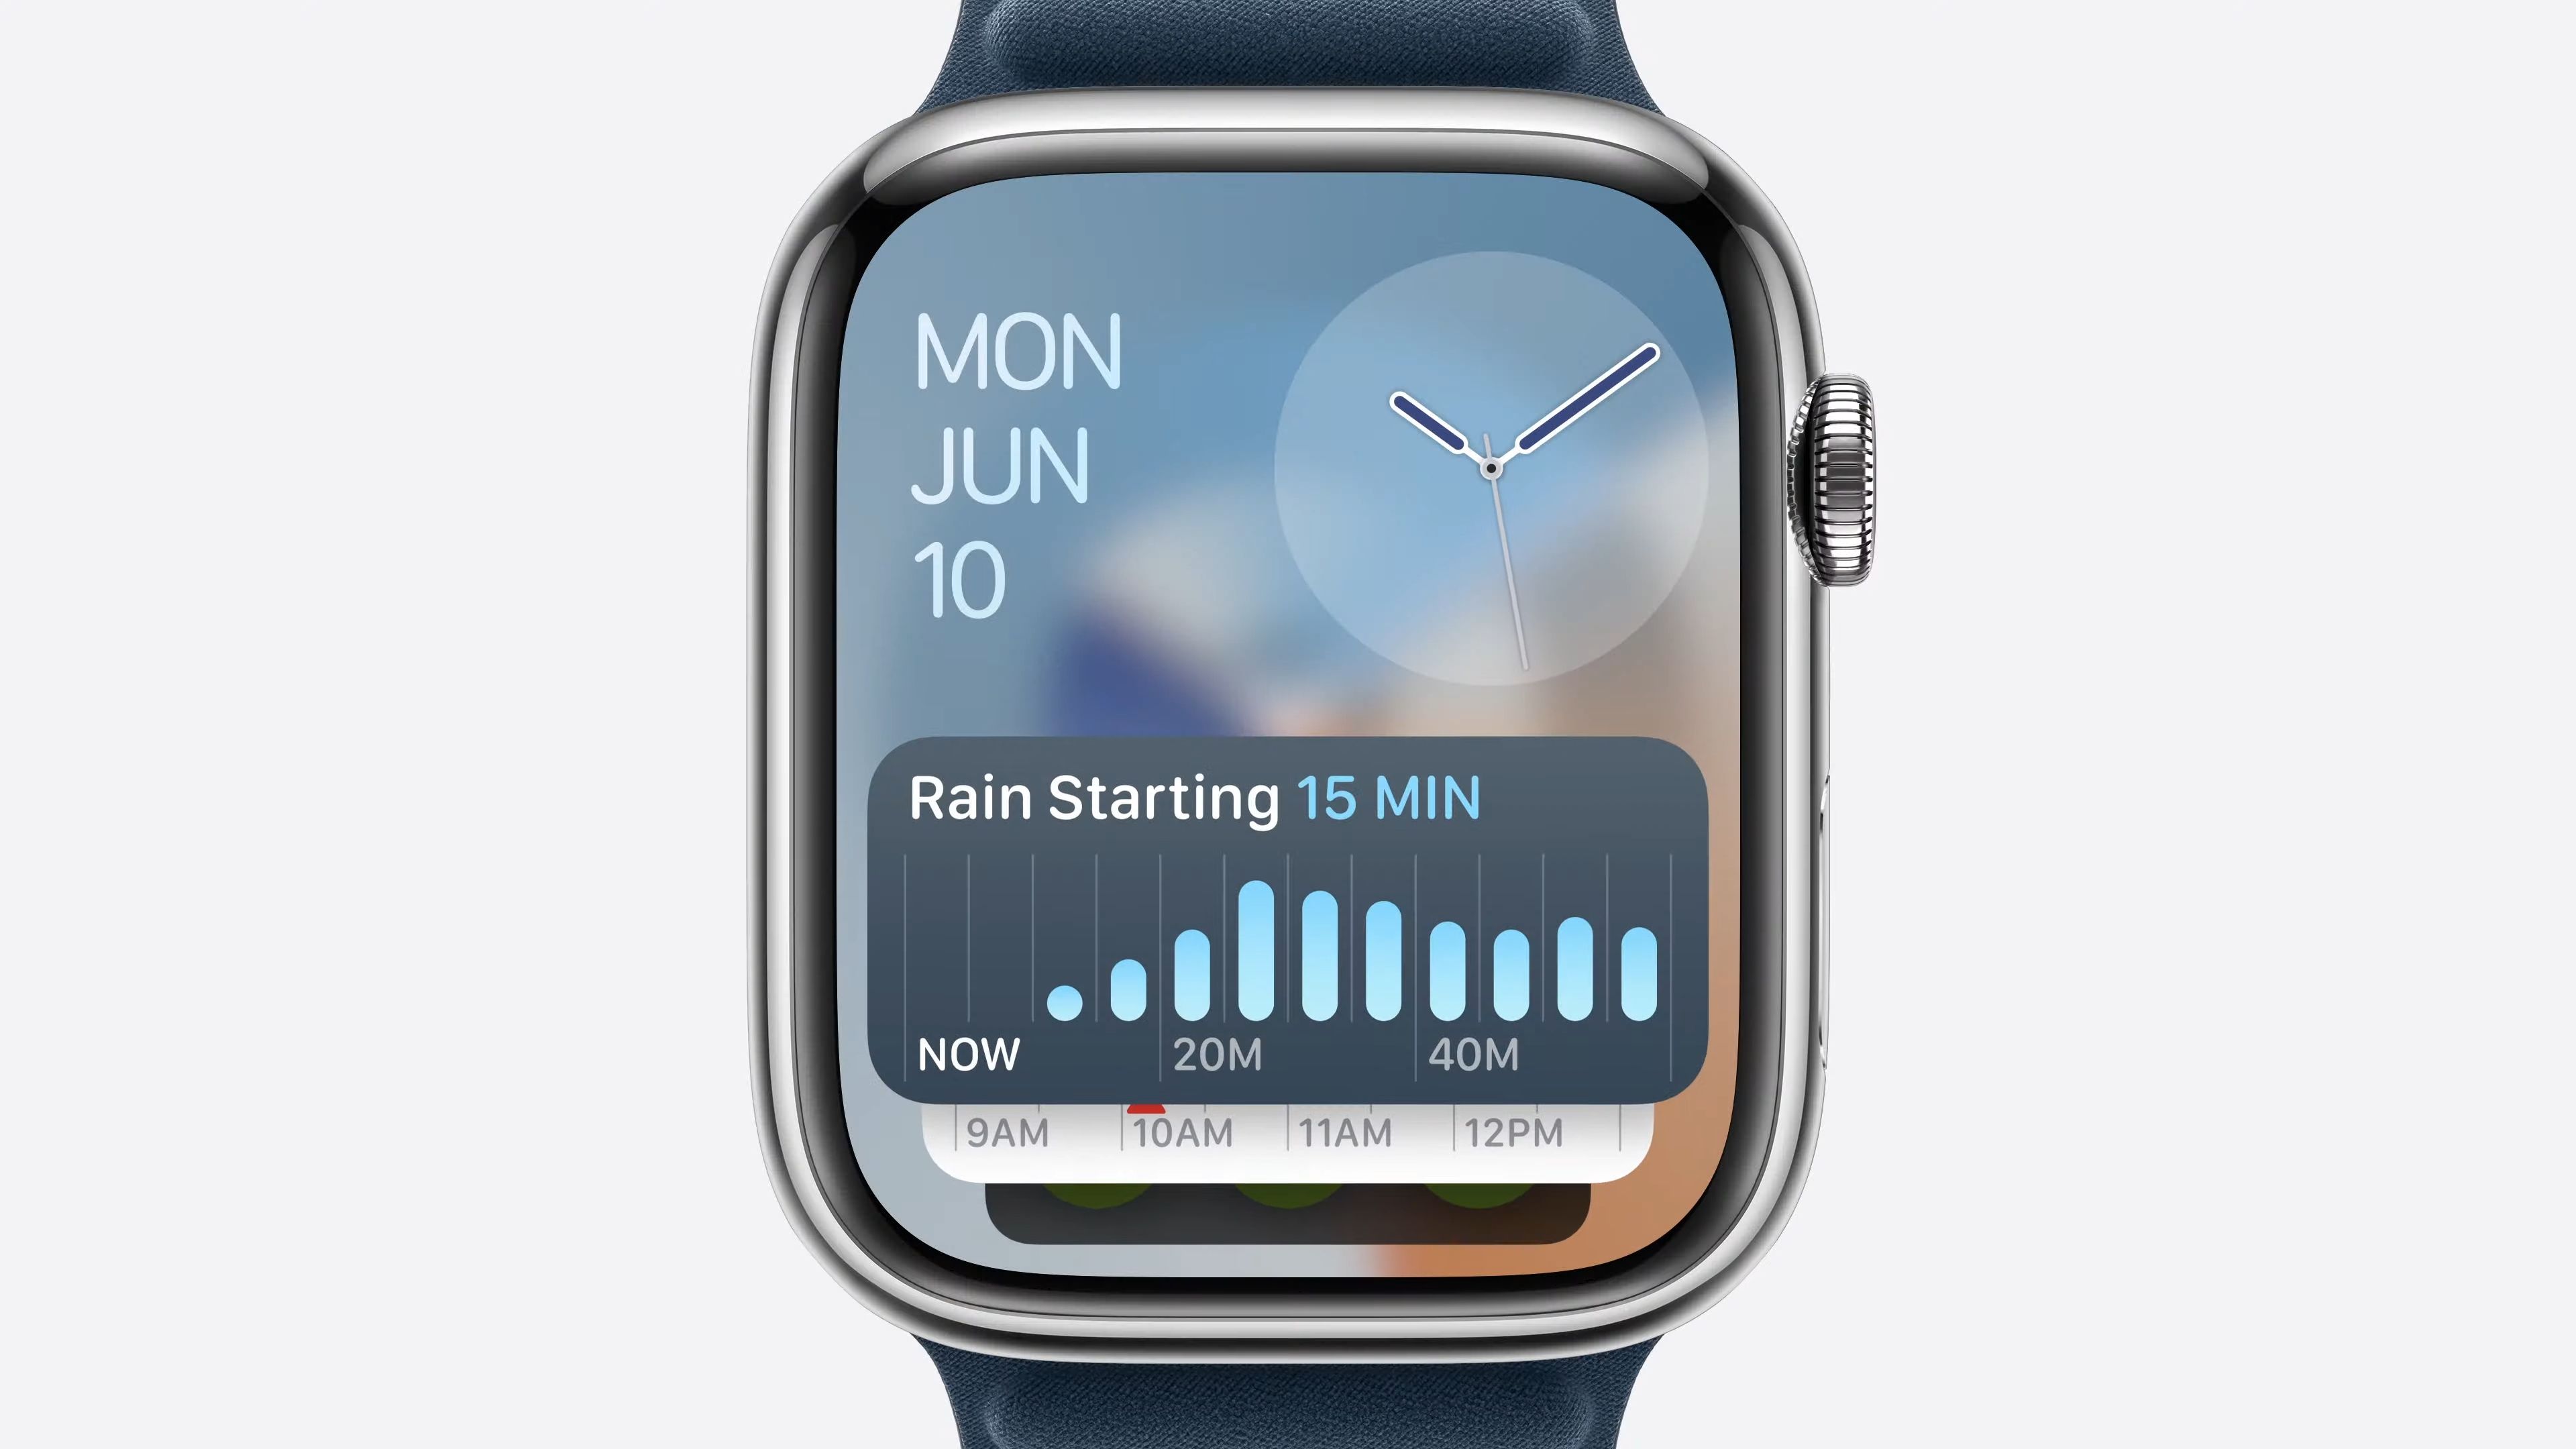 The watchOS screen with the weather